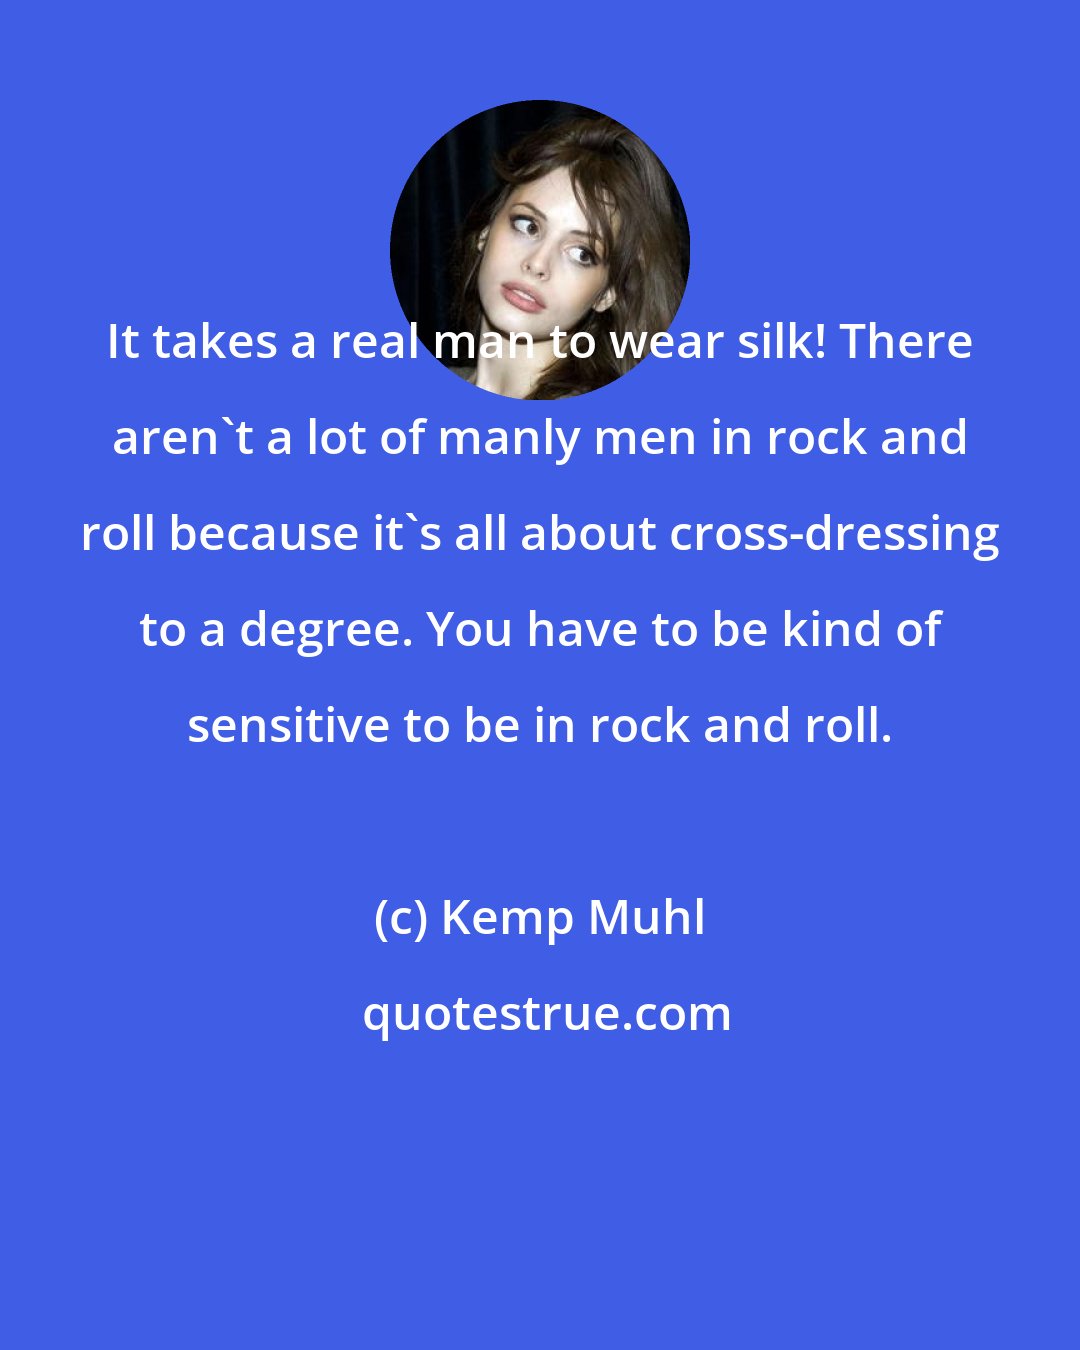 Kemp Muhl: It takes a real man to wear silk! There aren't a lot of manly men in rock and roll because it's all about cross-dressing to a degree. You have to be kind of sensitive to be in rock and roll.